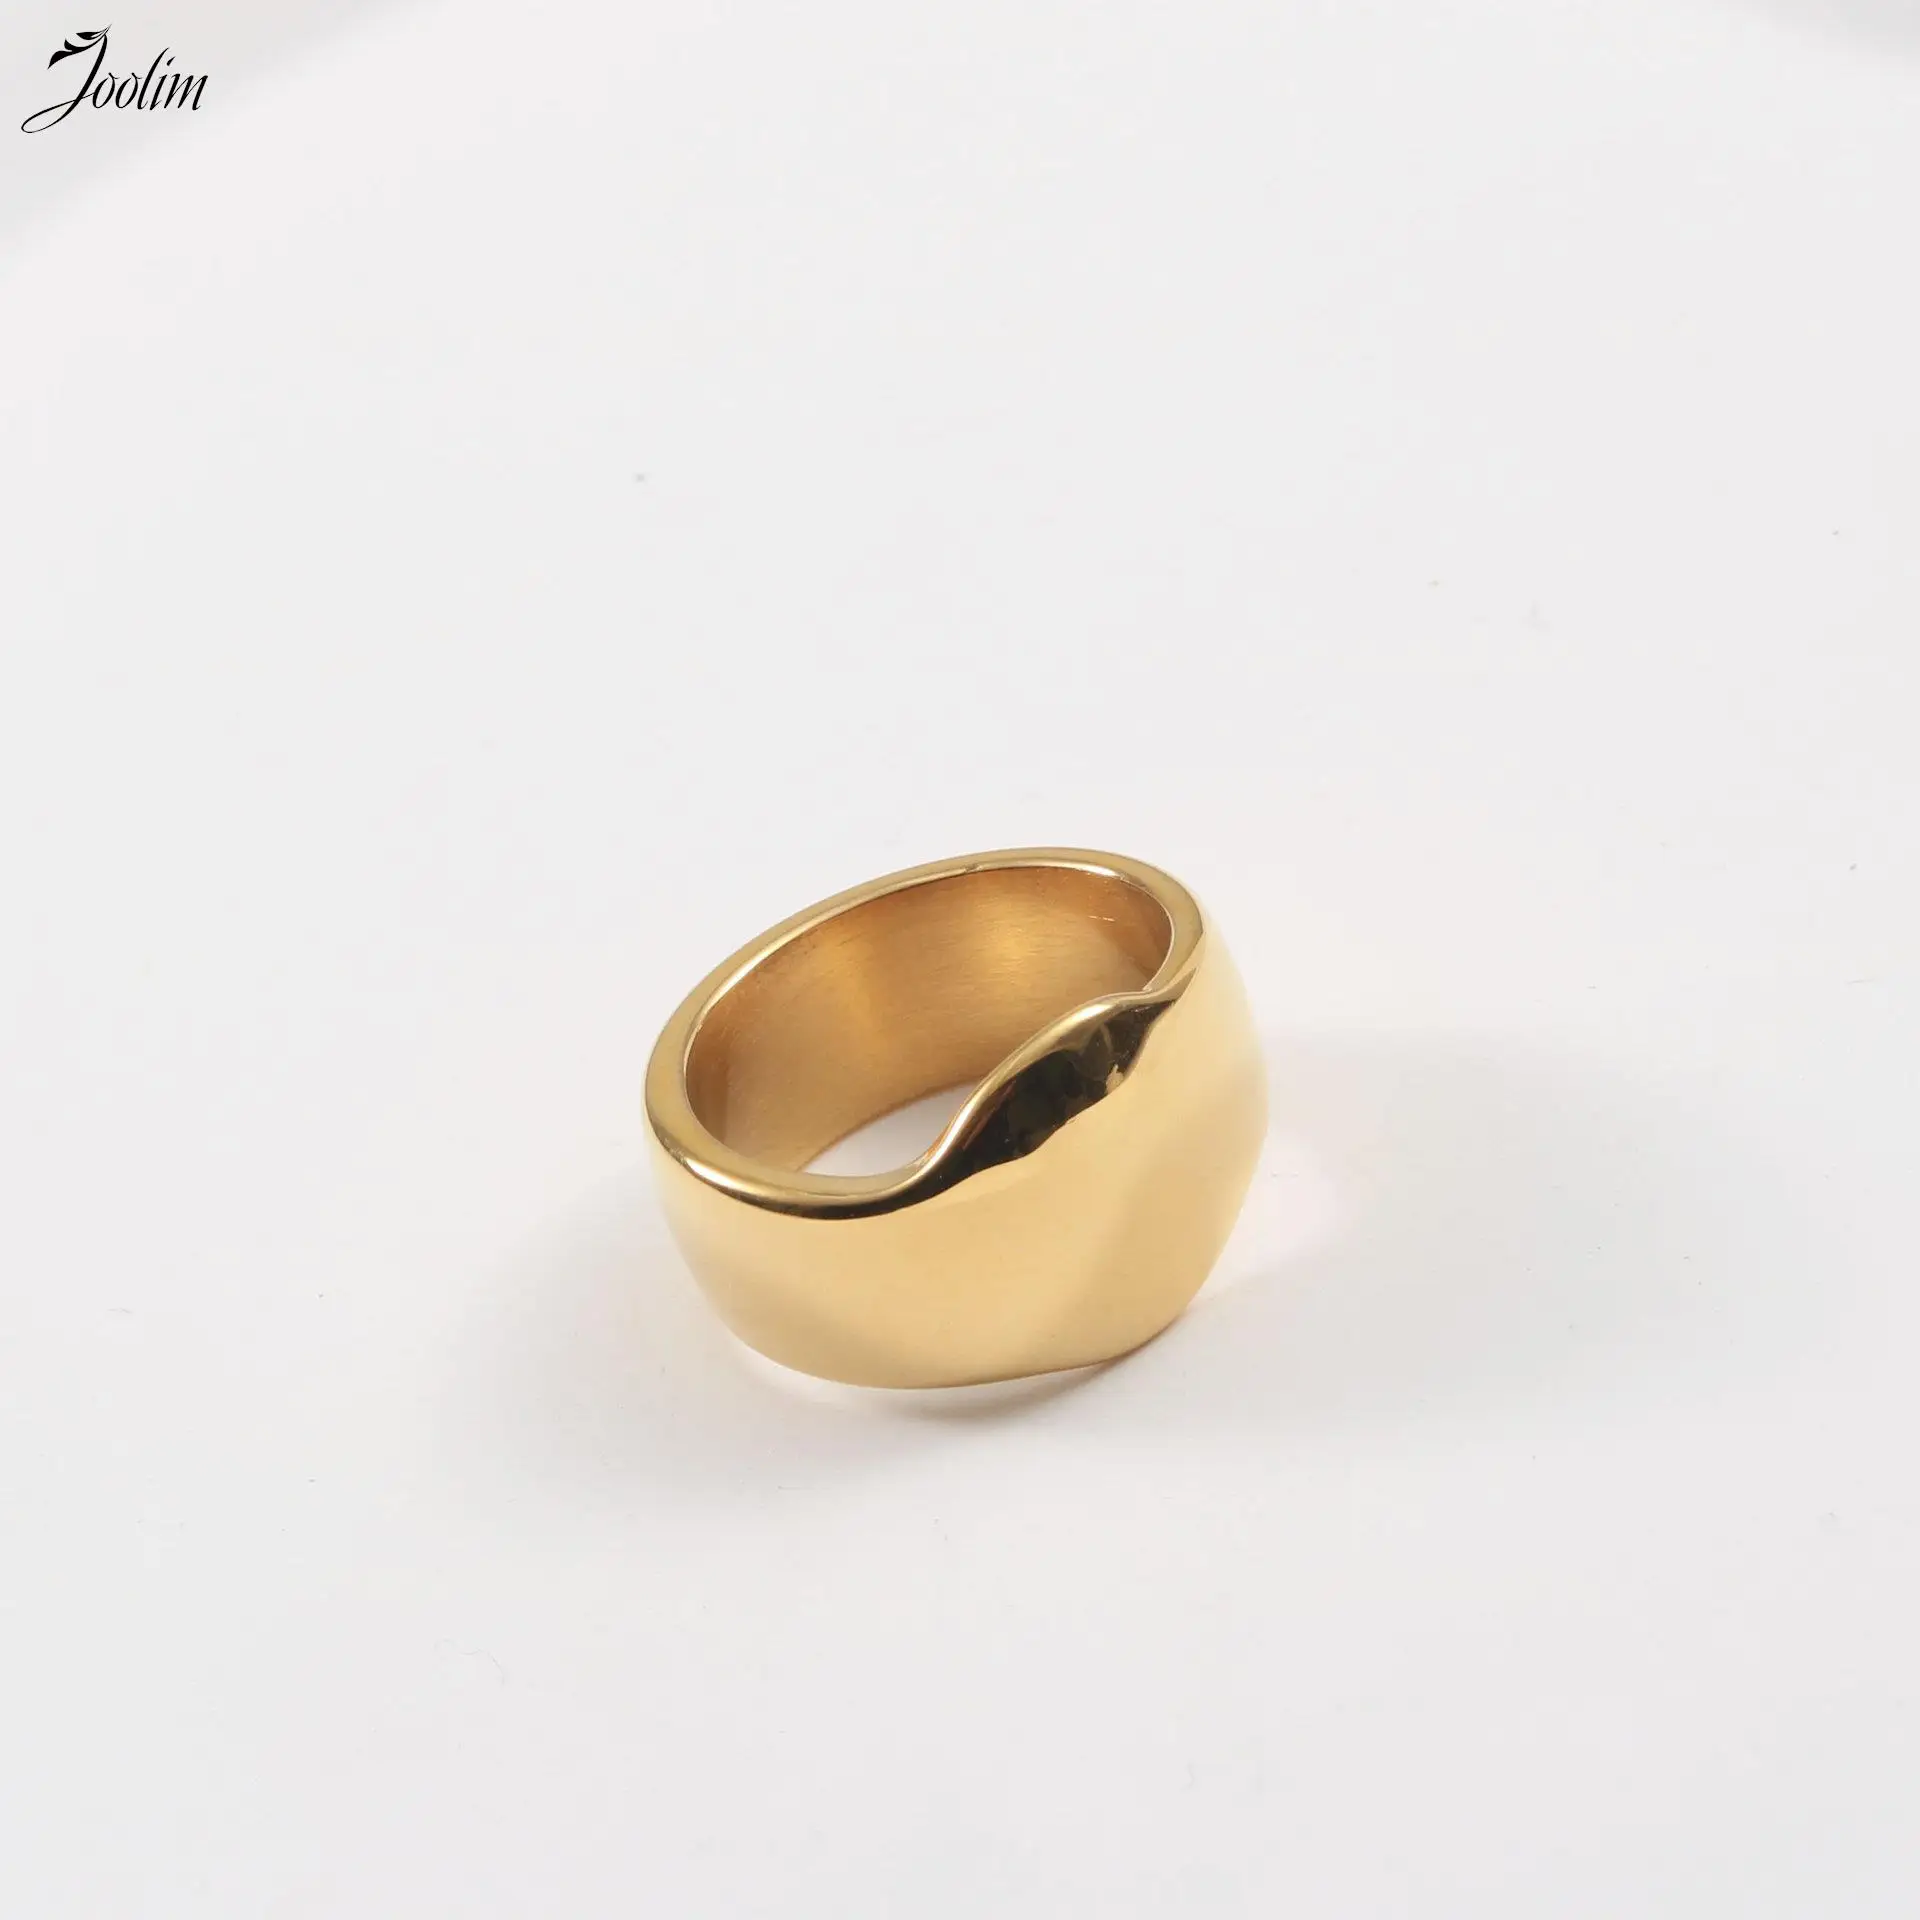 

Joolim High End Gold Finish Geometric Irregular Wide Curved Surface Rings 18K PVD Plated Stainless Steel Jewelry Wholesale